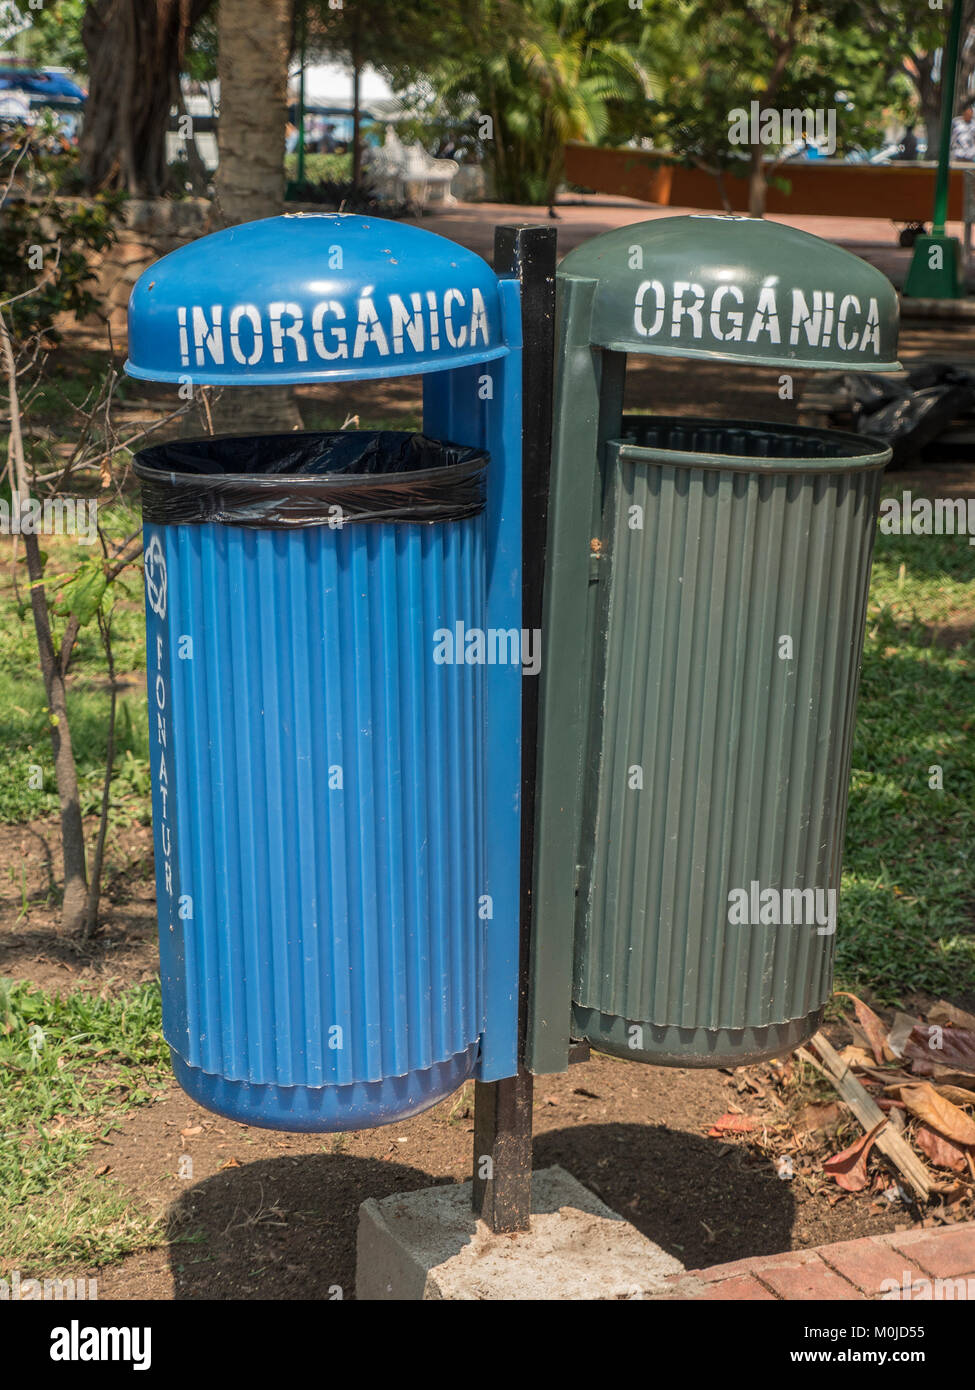 https://c8.alamy.com/comp/M0JD55/public-litter-bins-in-a-park-for-recycling-organic-and-inorganic-waste-M0JD55.jpg